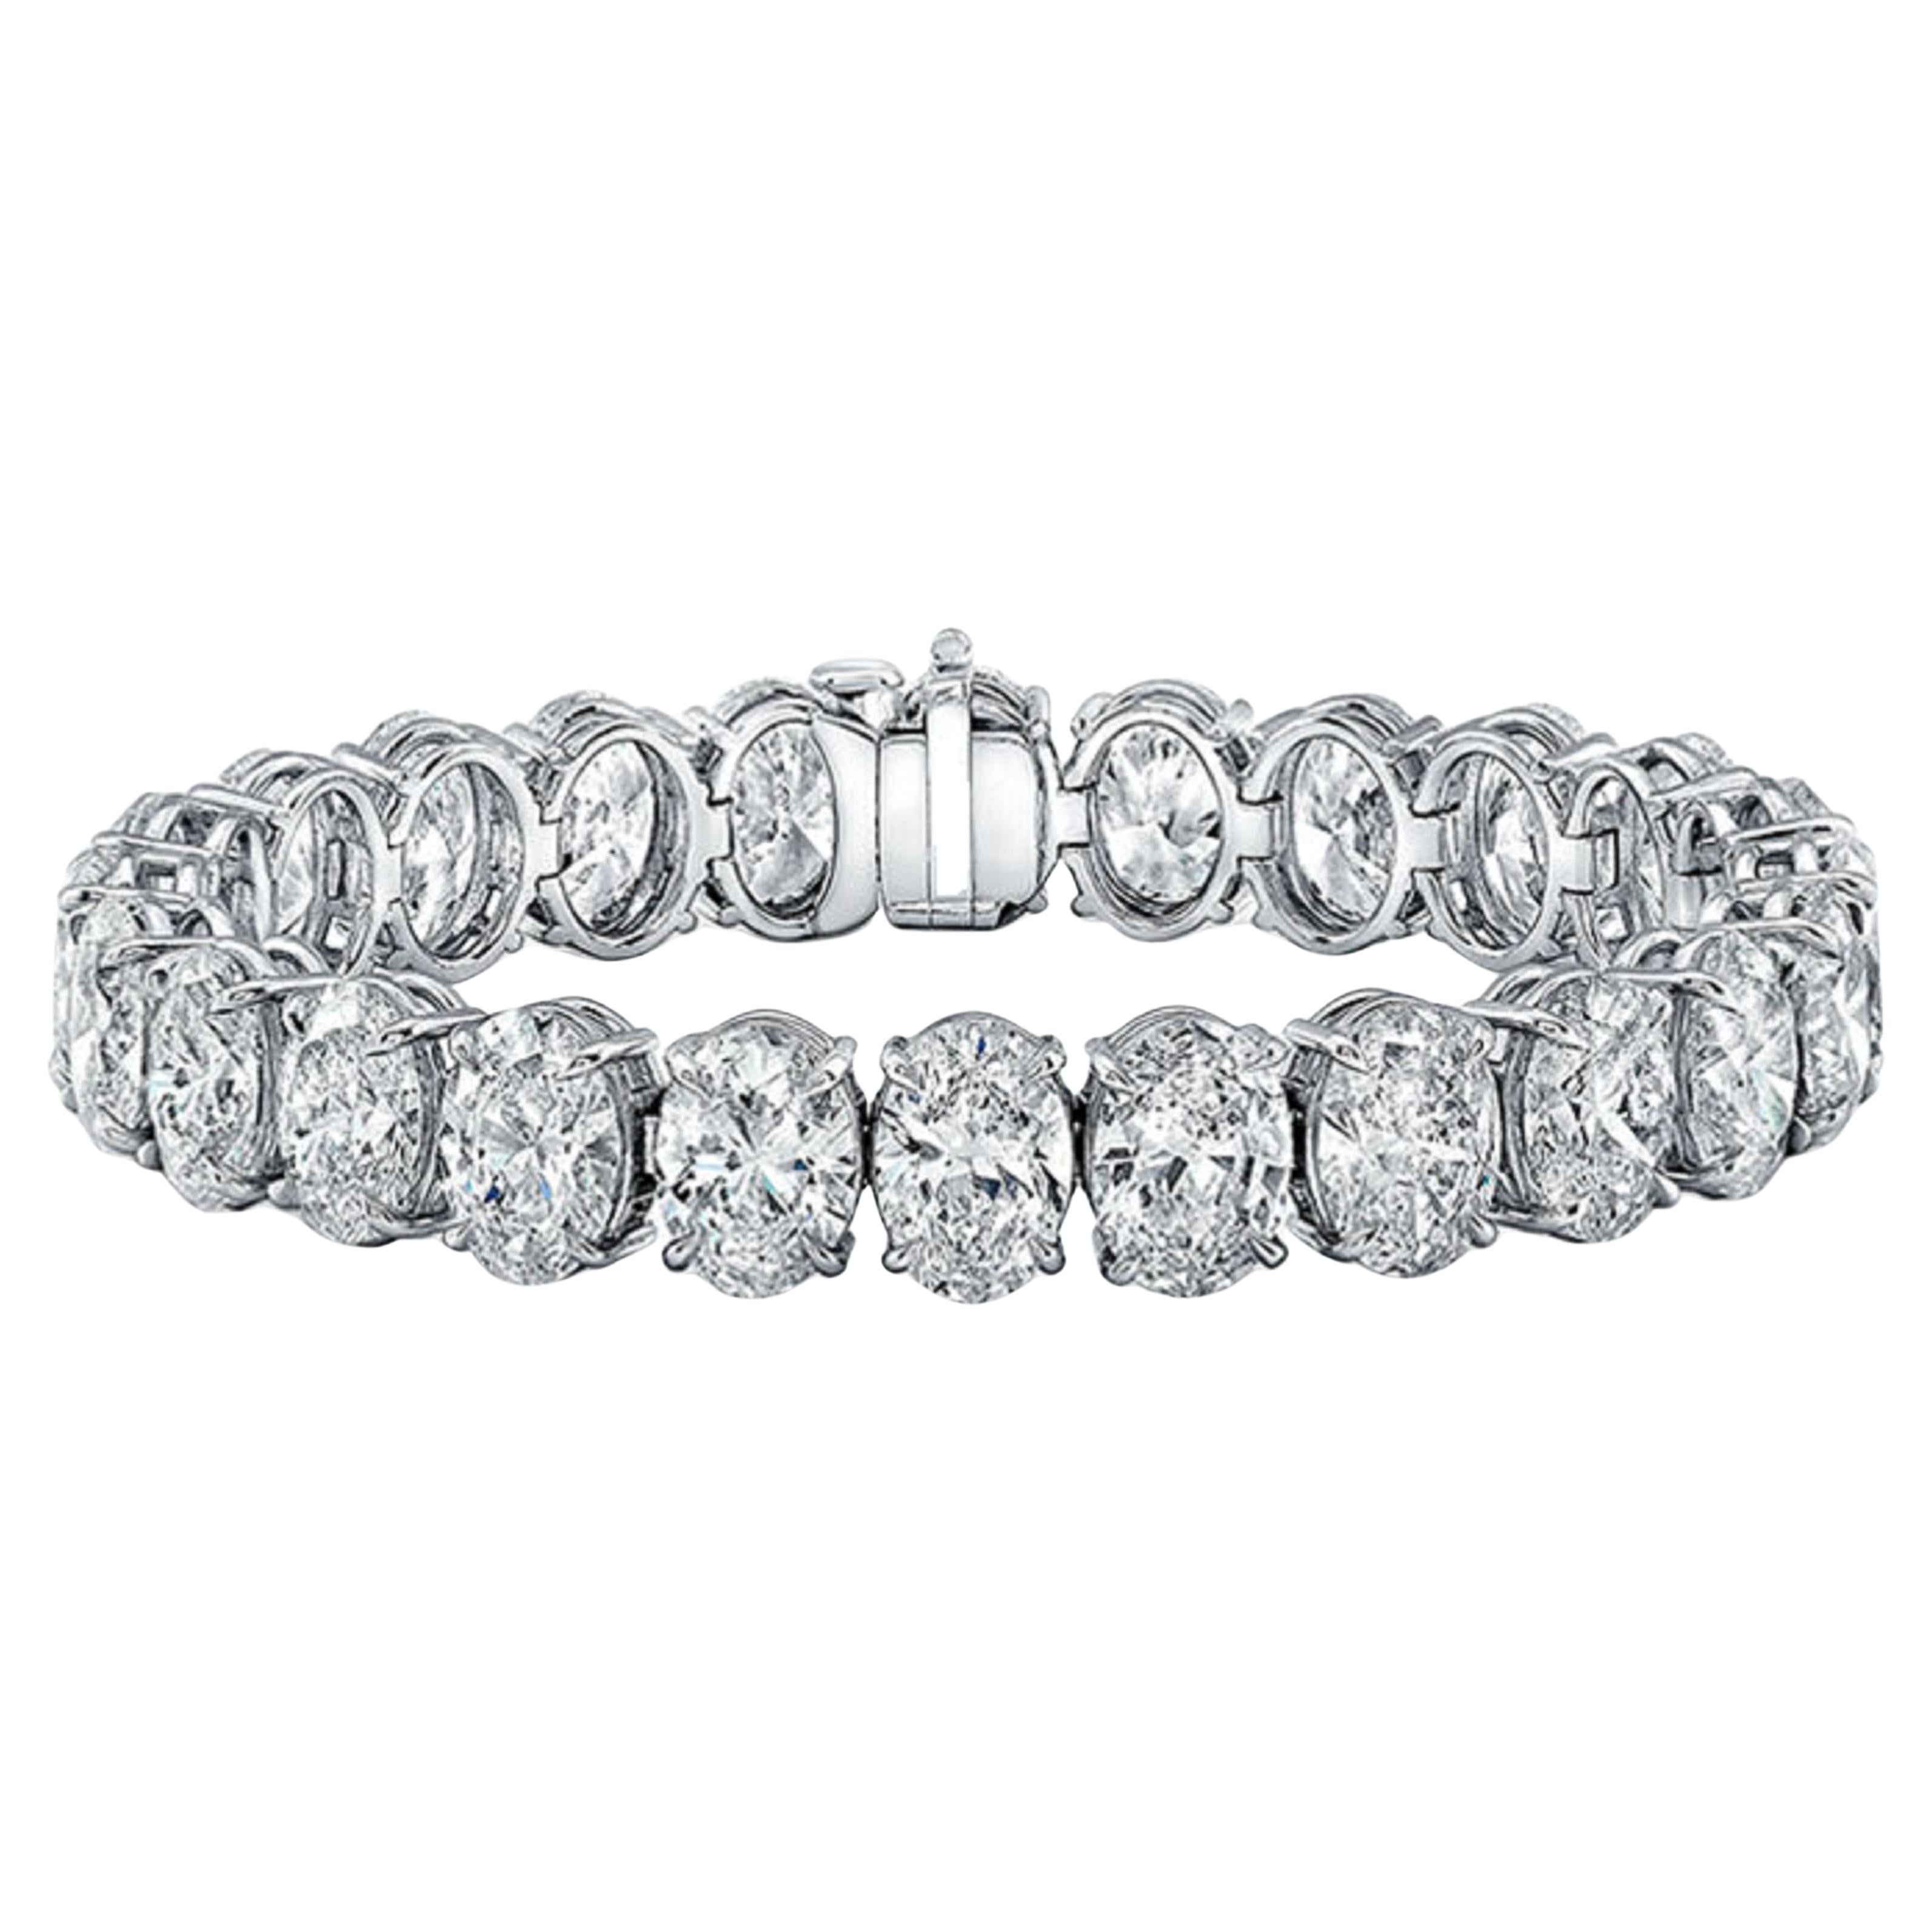 Indulge in luxury with this stunning 7-inch Tennis Bracelet crafted in platinum, featuring a dazzling array of GIA certified oval diamonds. Each oval diamond is meticulously set in a basket claw prong setting, ensuring maximum security and